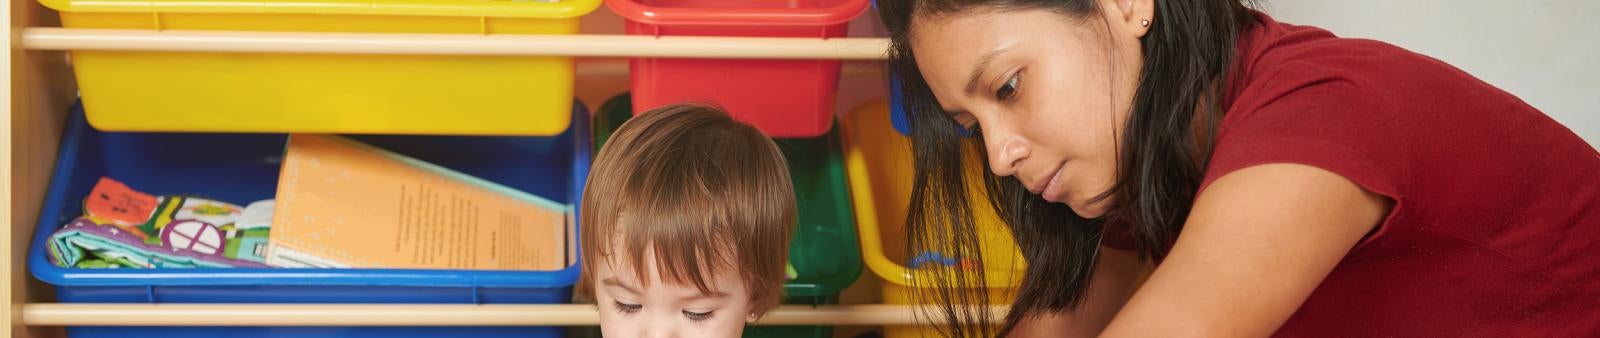 Education - Early Childhood Banner Image